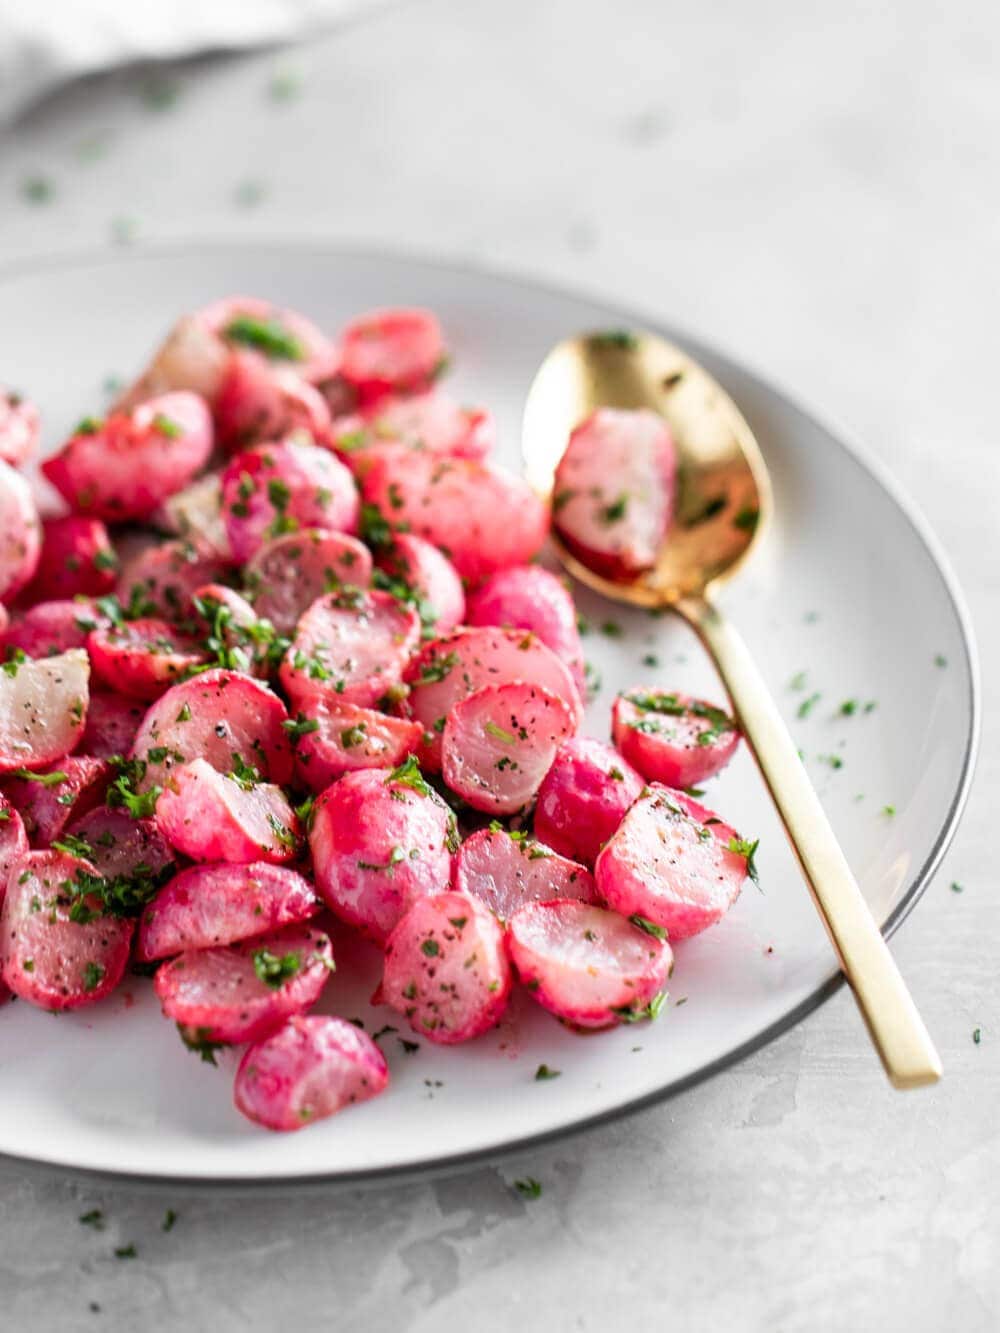 A plate of cooked radishes with fresh parsley and lemon juice drizzled on top.